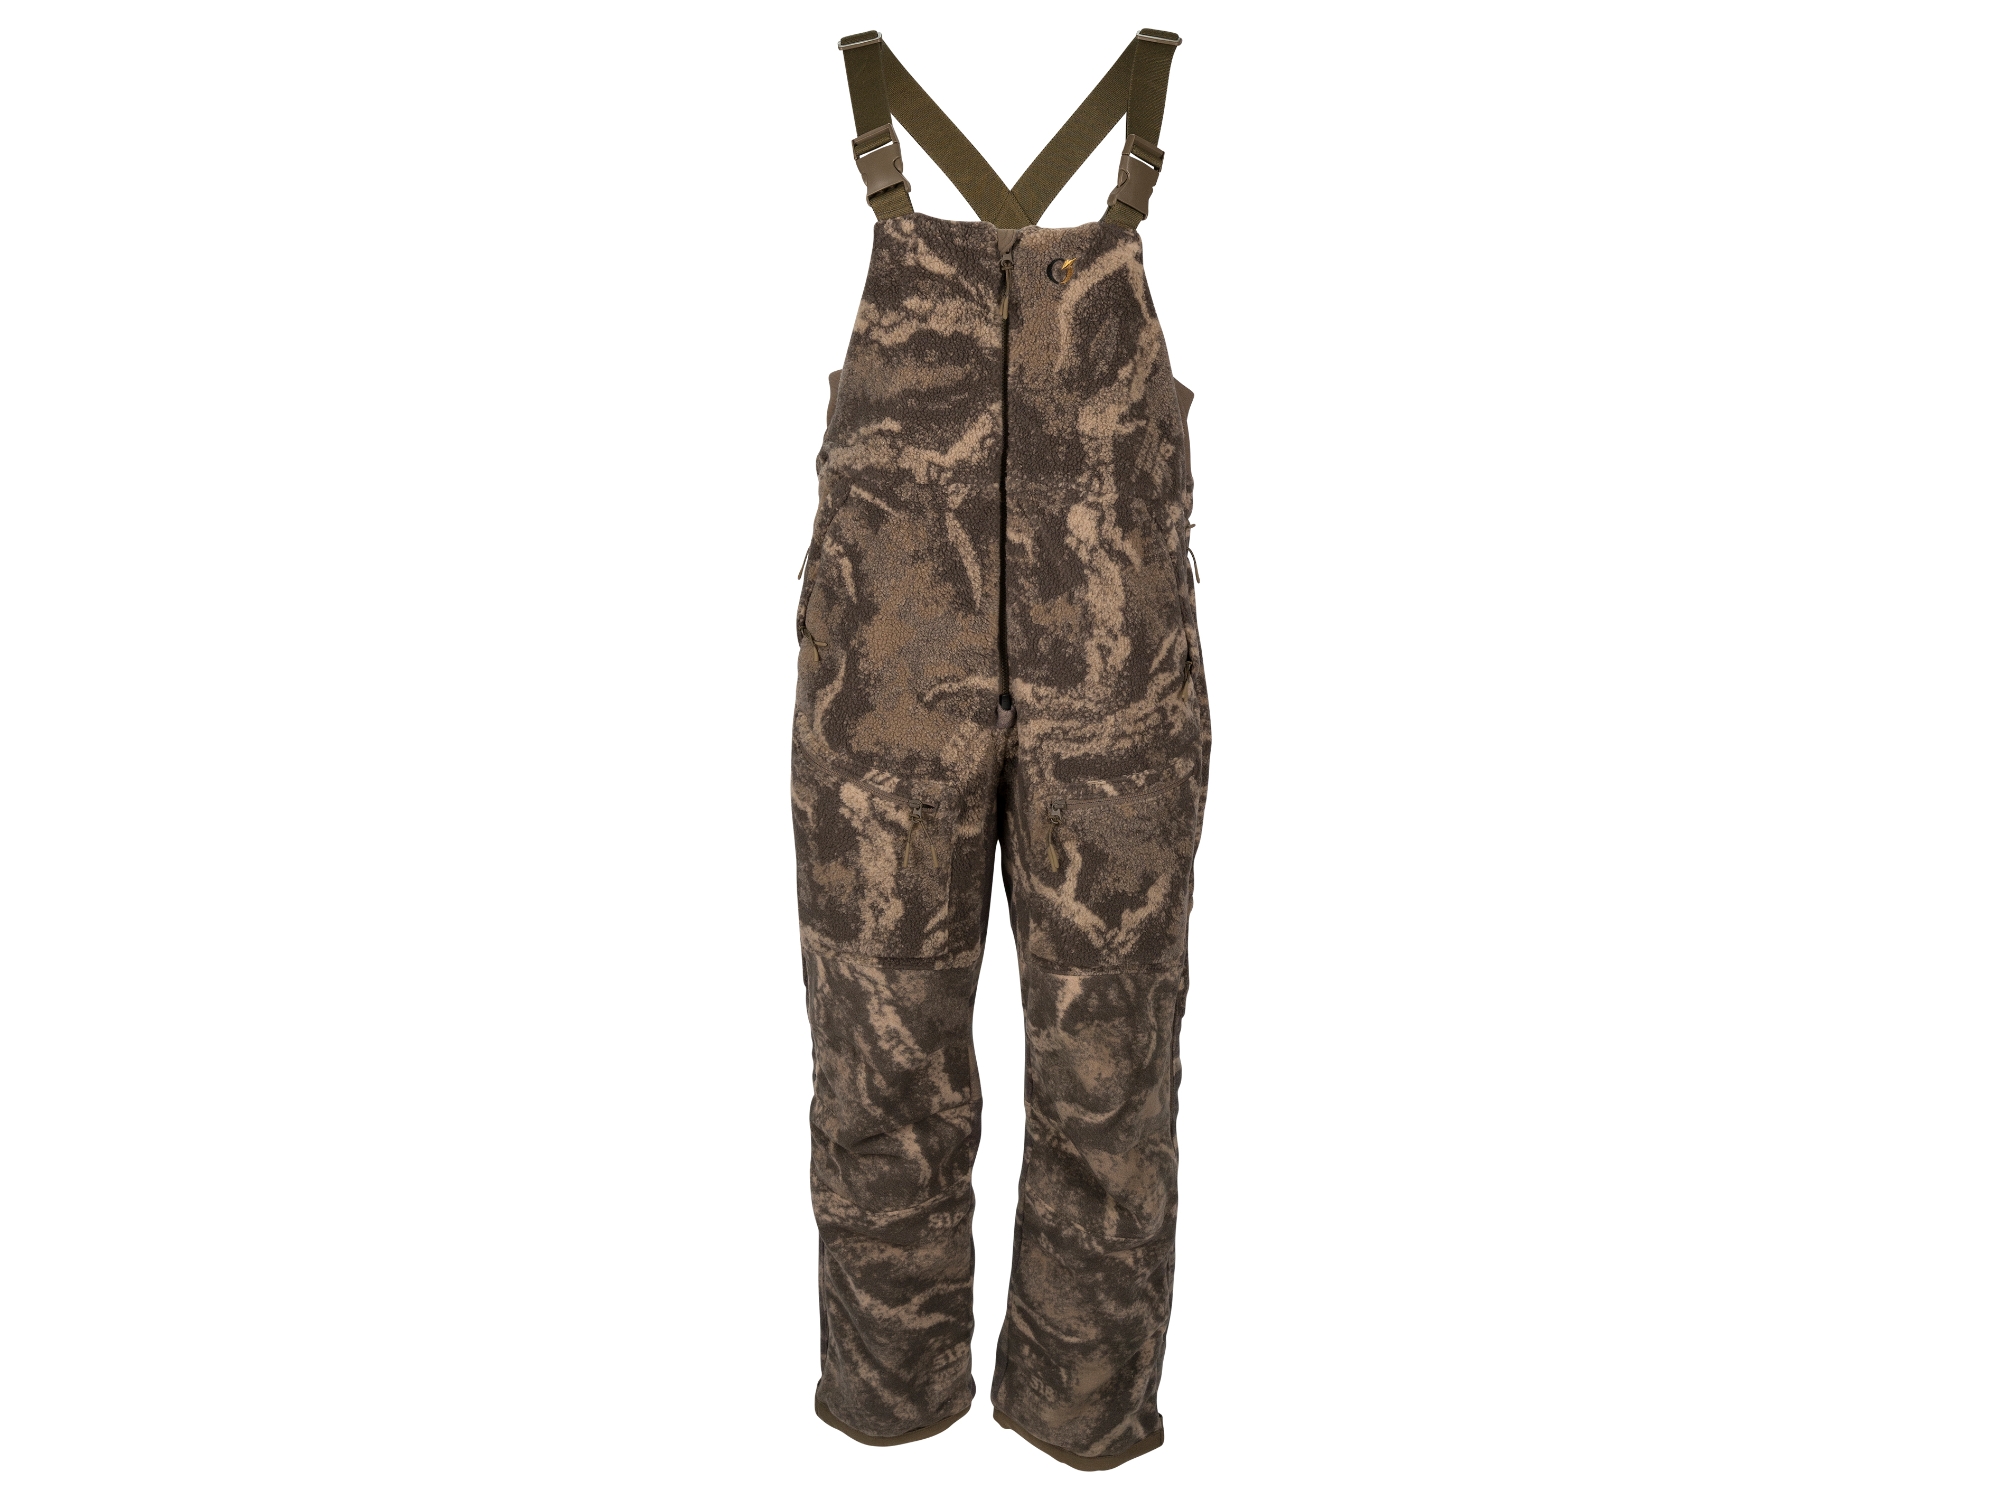 Code of Silence Zone 7- Dialed In Bib, XL-Tall, S-18 CAMO